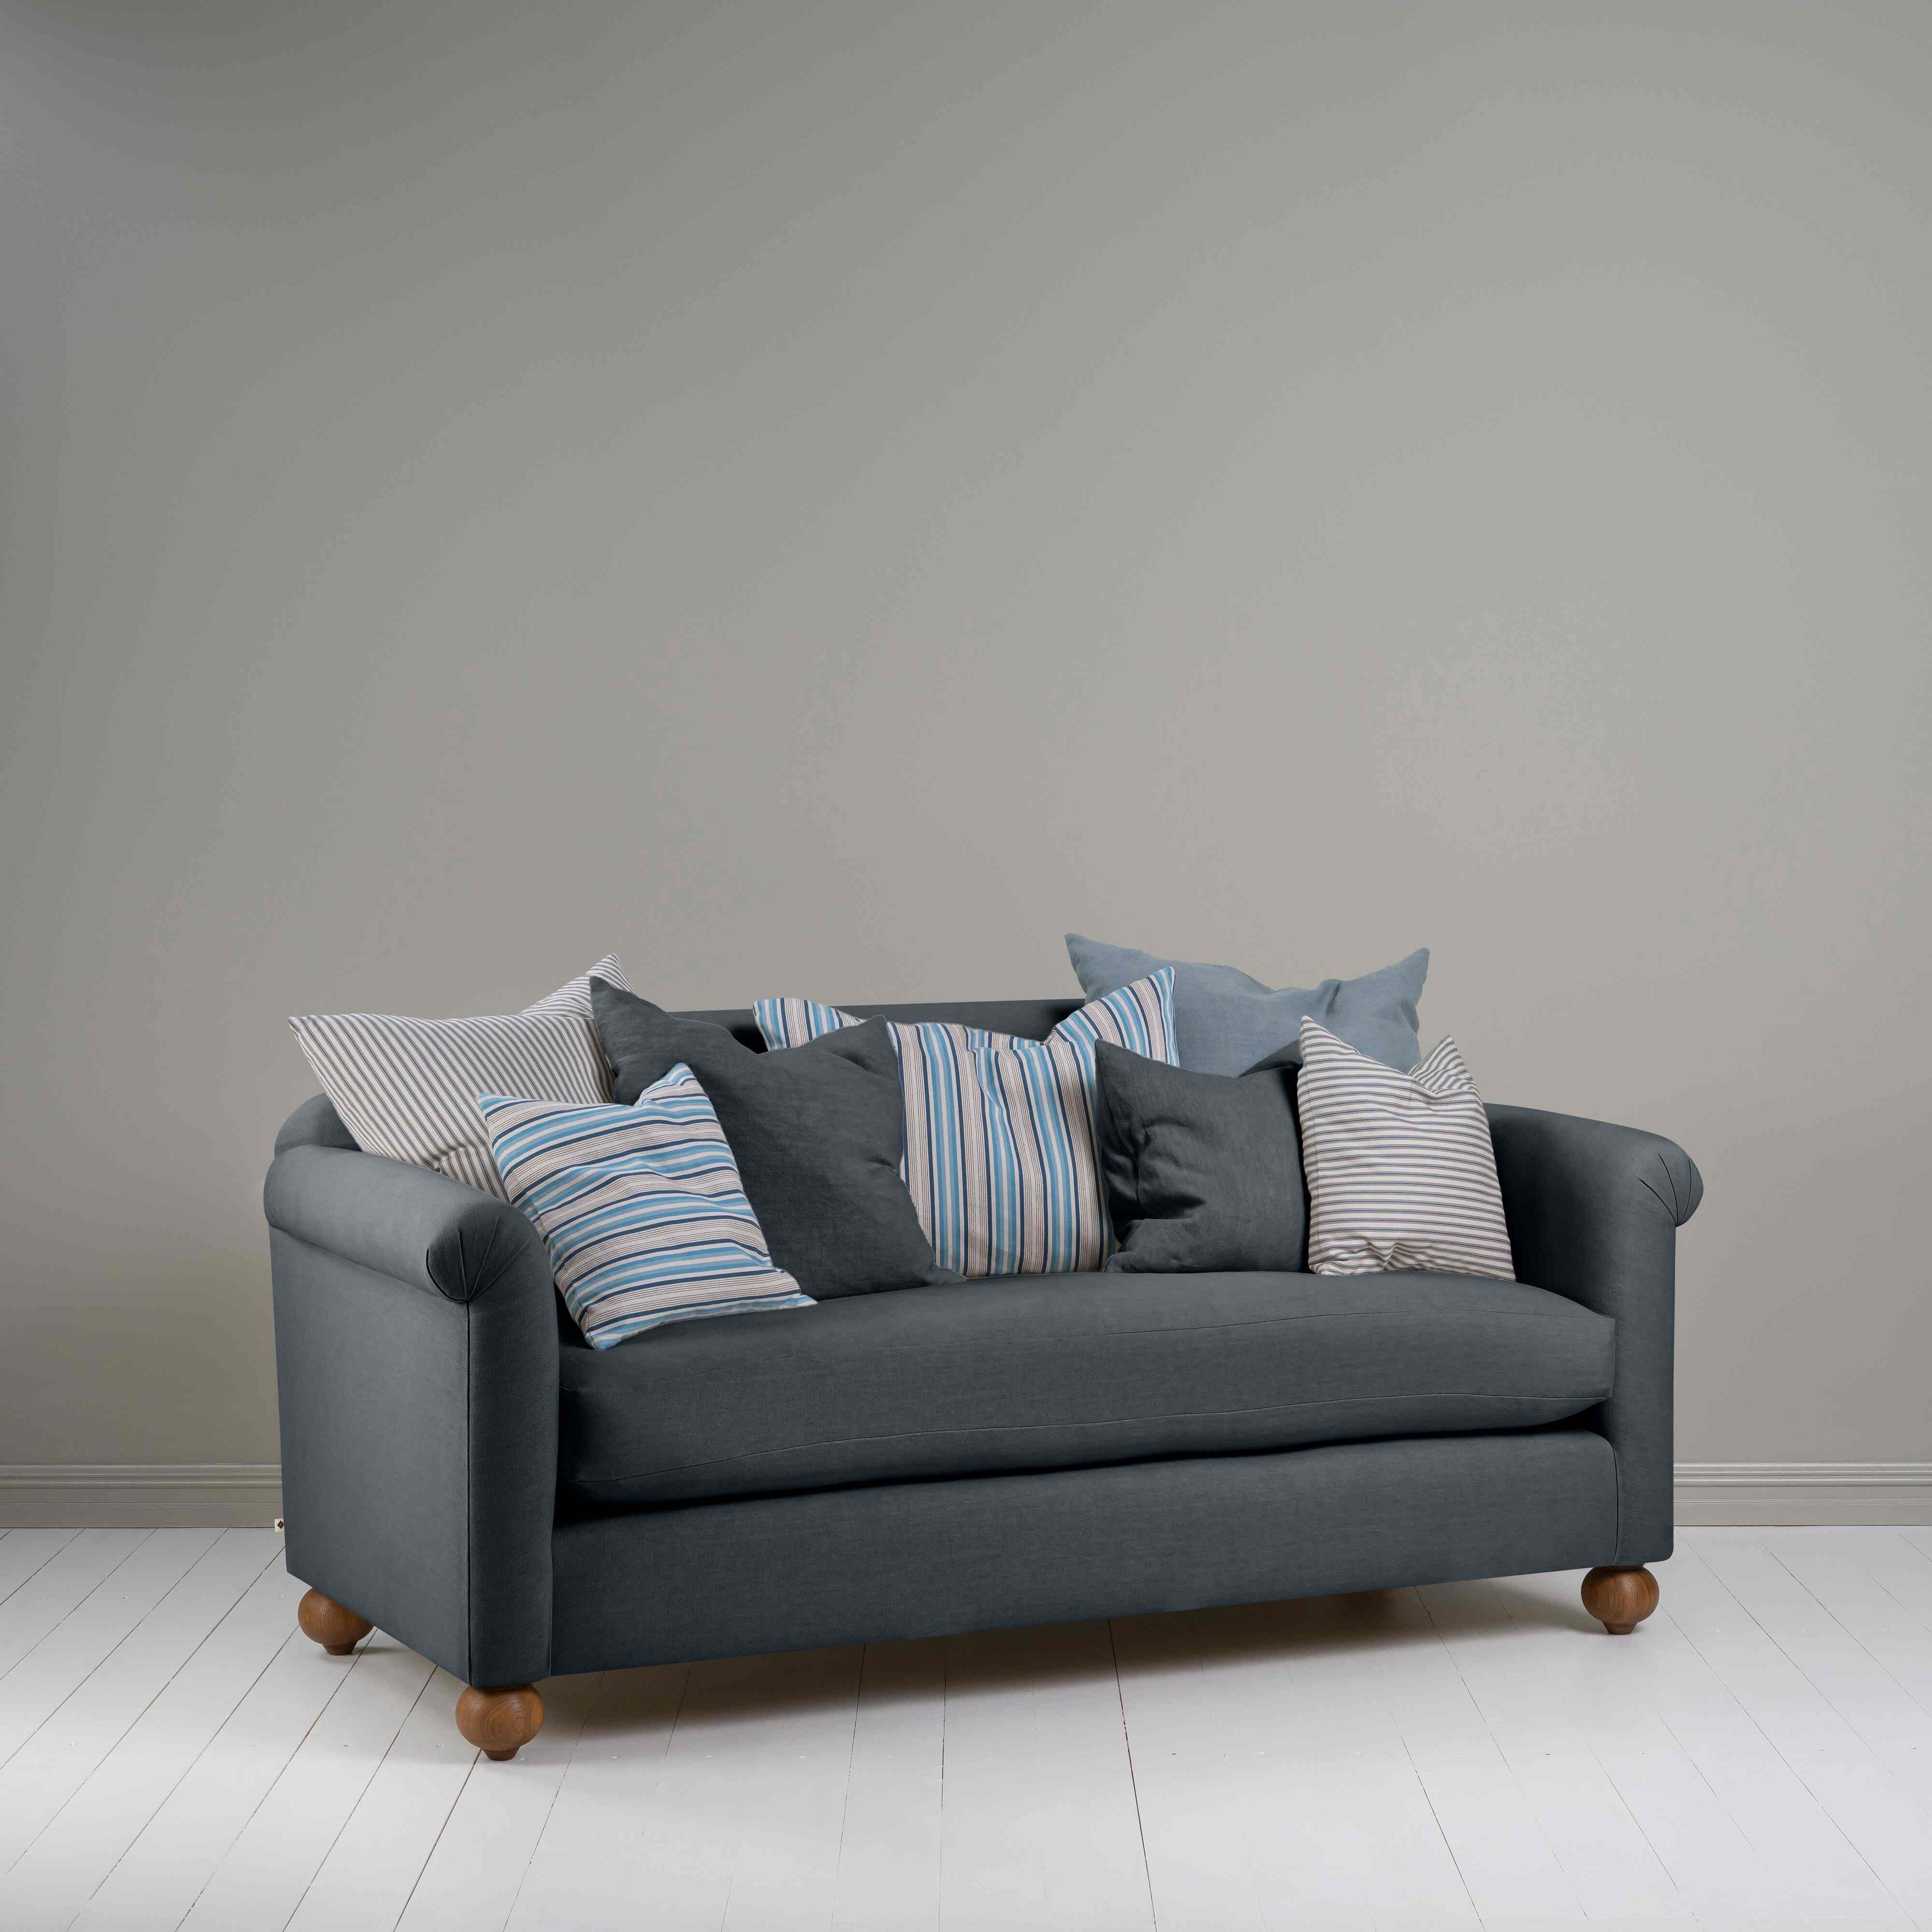  Dolittle 3 Seater Sofa in Laidback Linen Midnight 